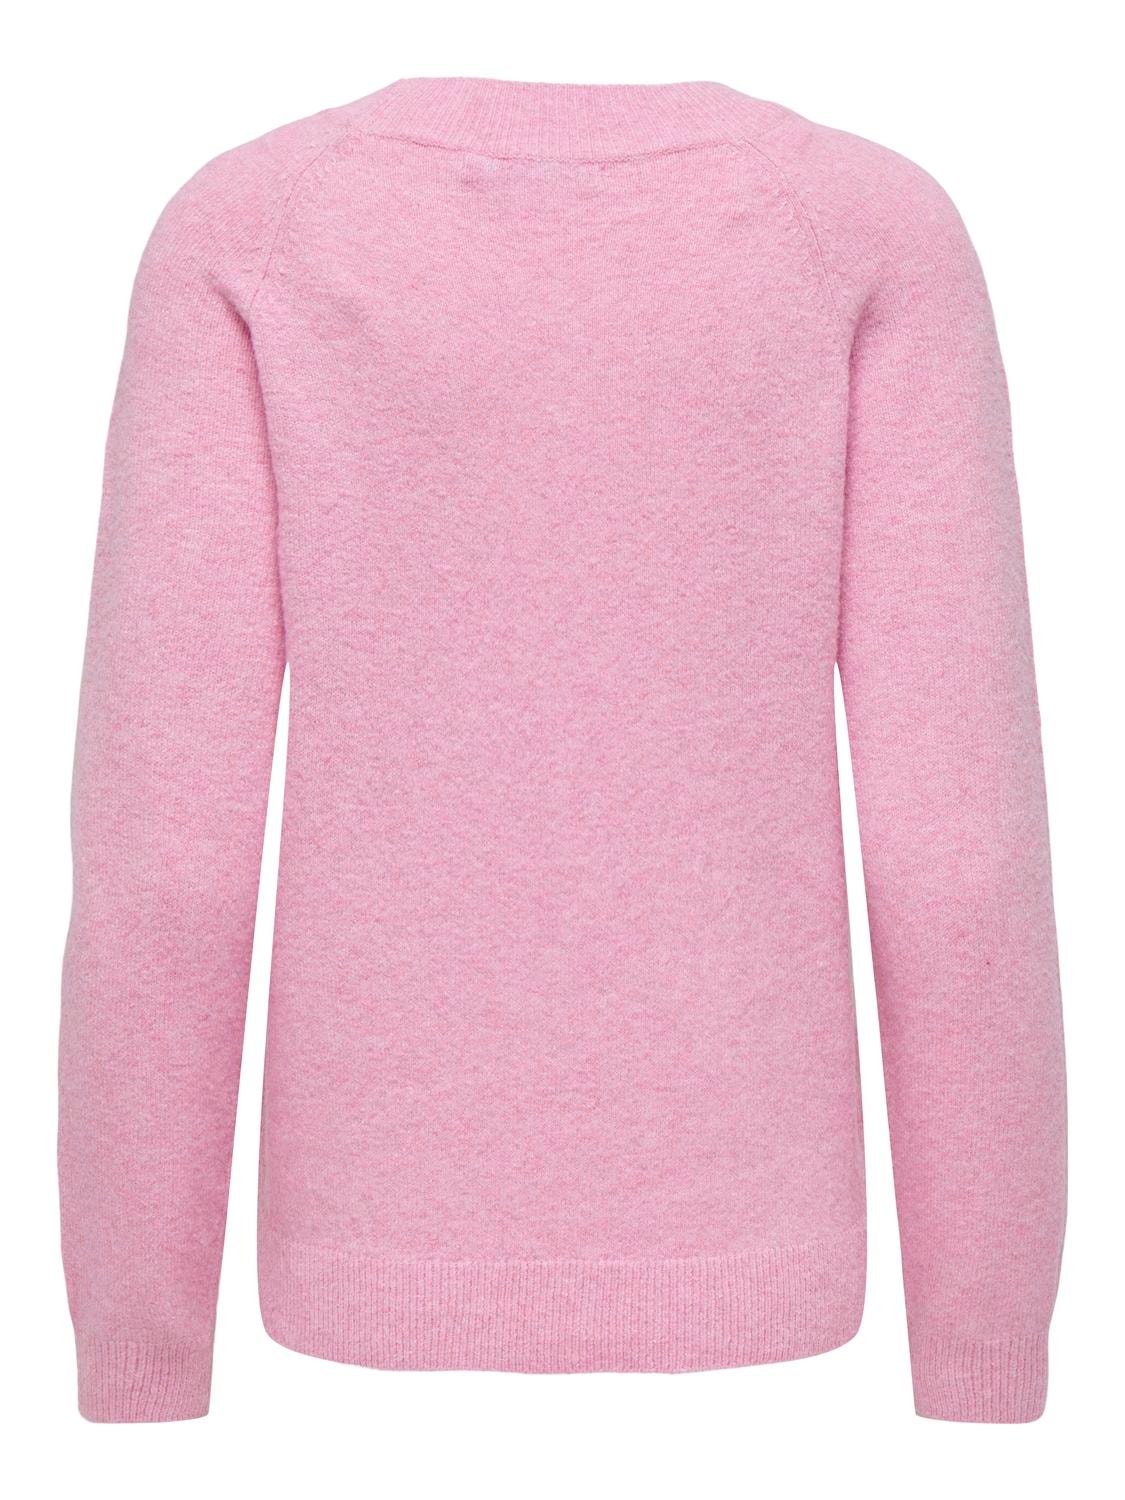 ONLY o-neck knitted pullover -Prism Pink - 15204279